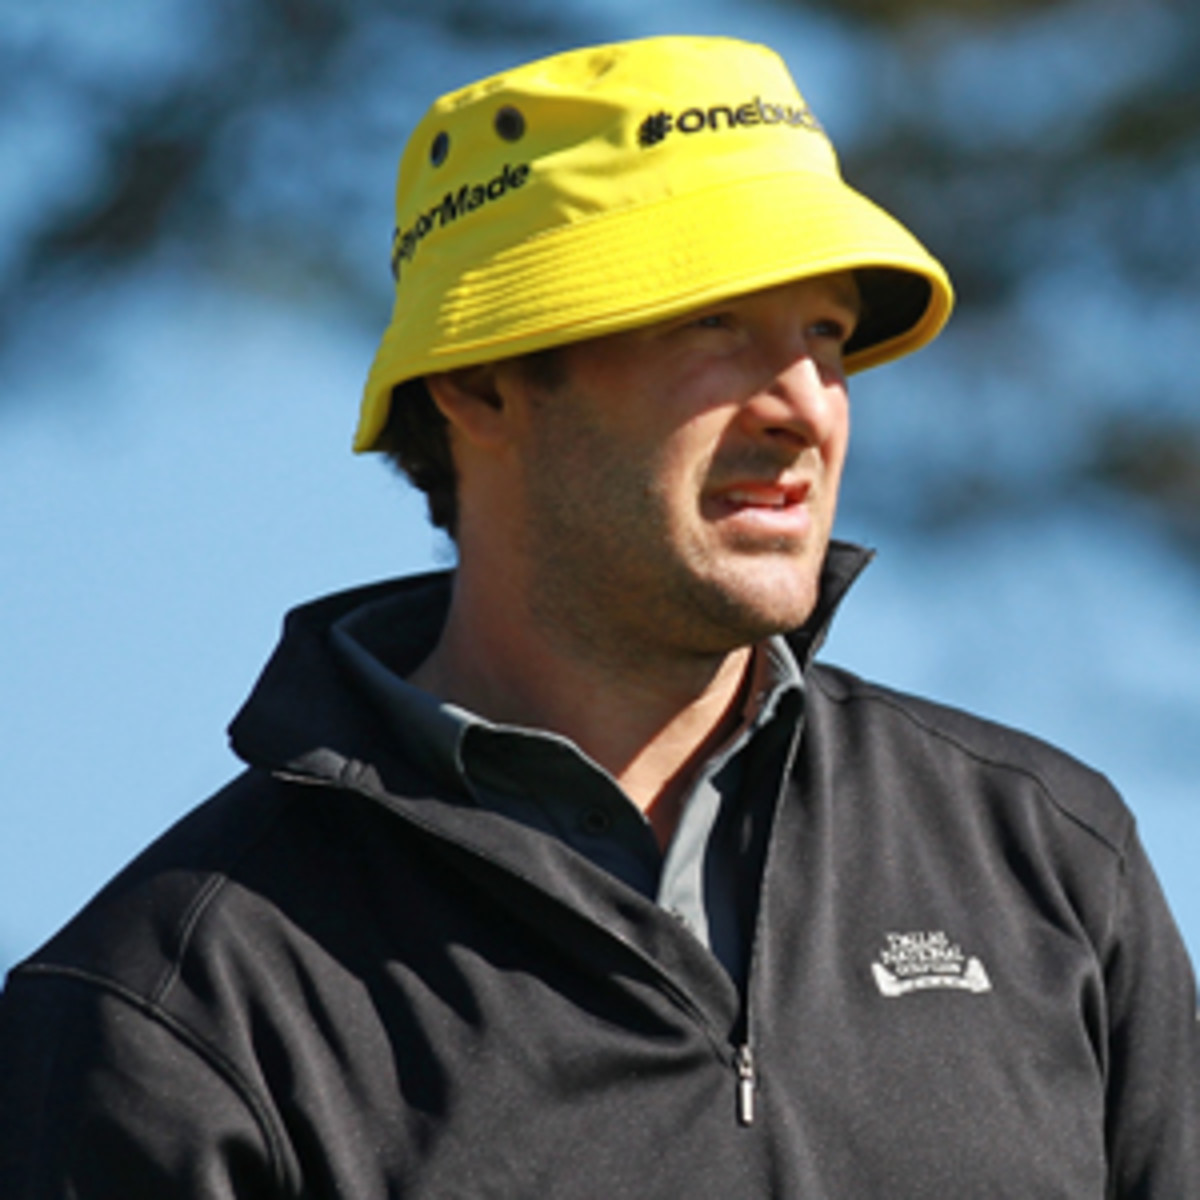 Cowboys quarterback Tony Romo played in the AT&T Pebble Beach National Pro-Am. (Jed Jacobsohn/Getty Images)